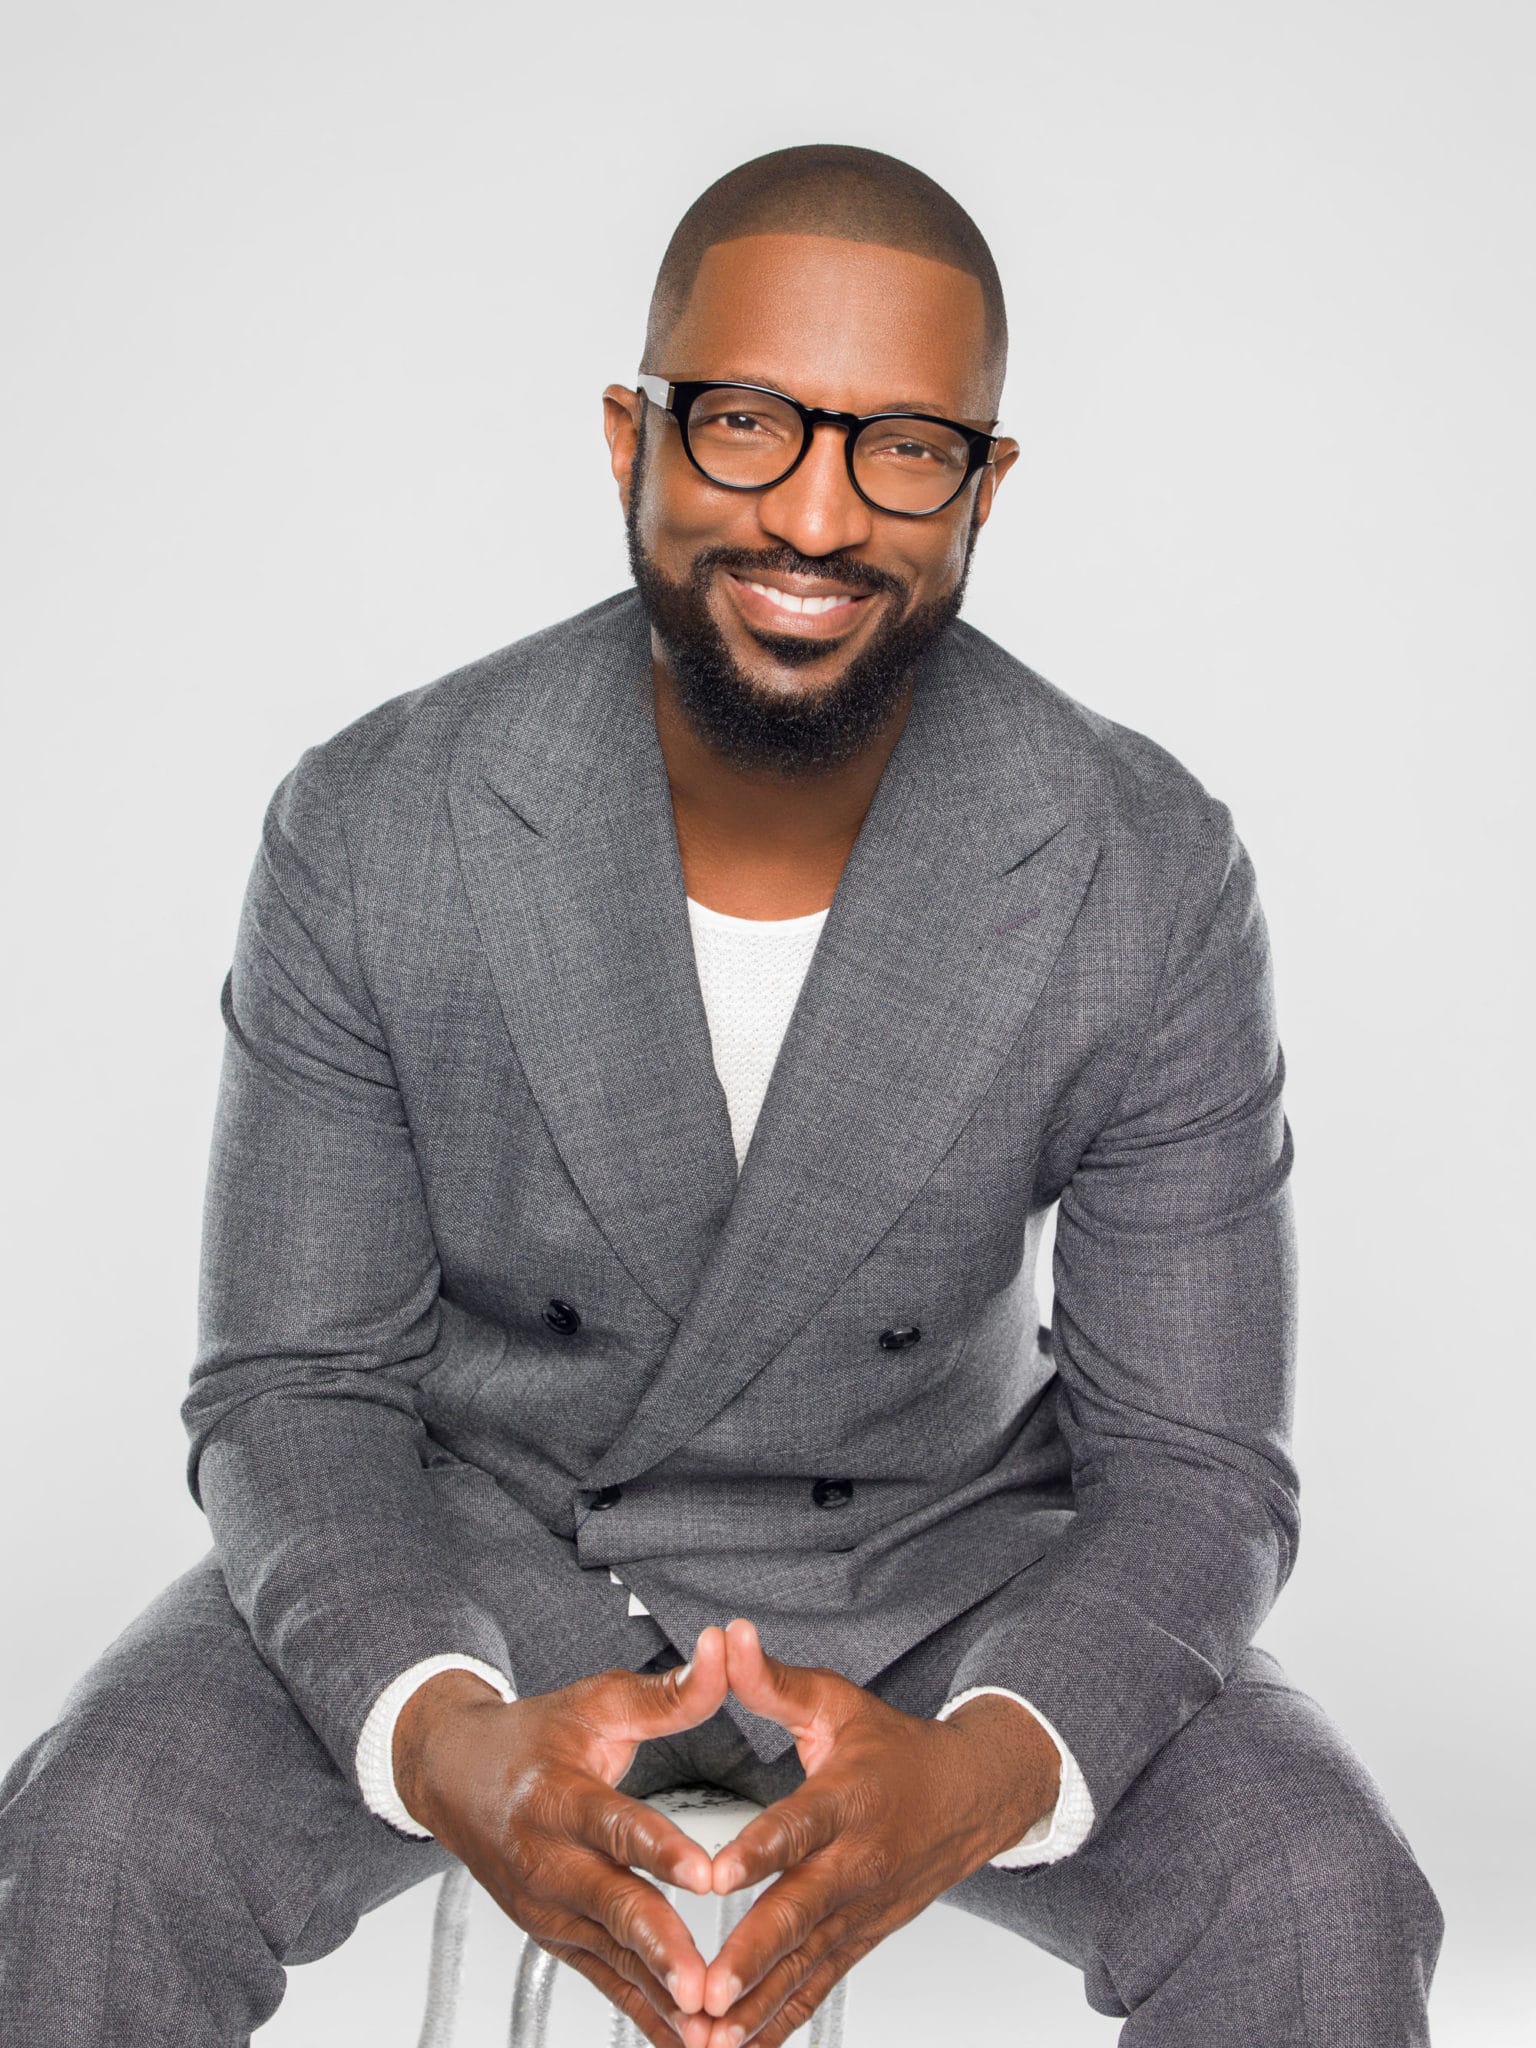 Rickey Smiley Takes Over Mornings At Beasley Media's 105.9 KISS FM In